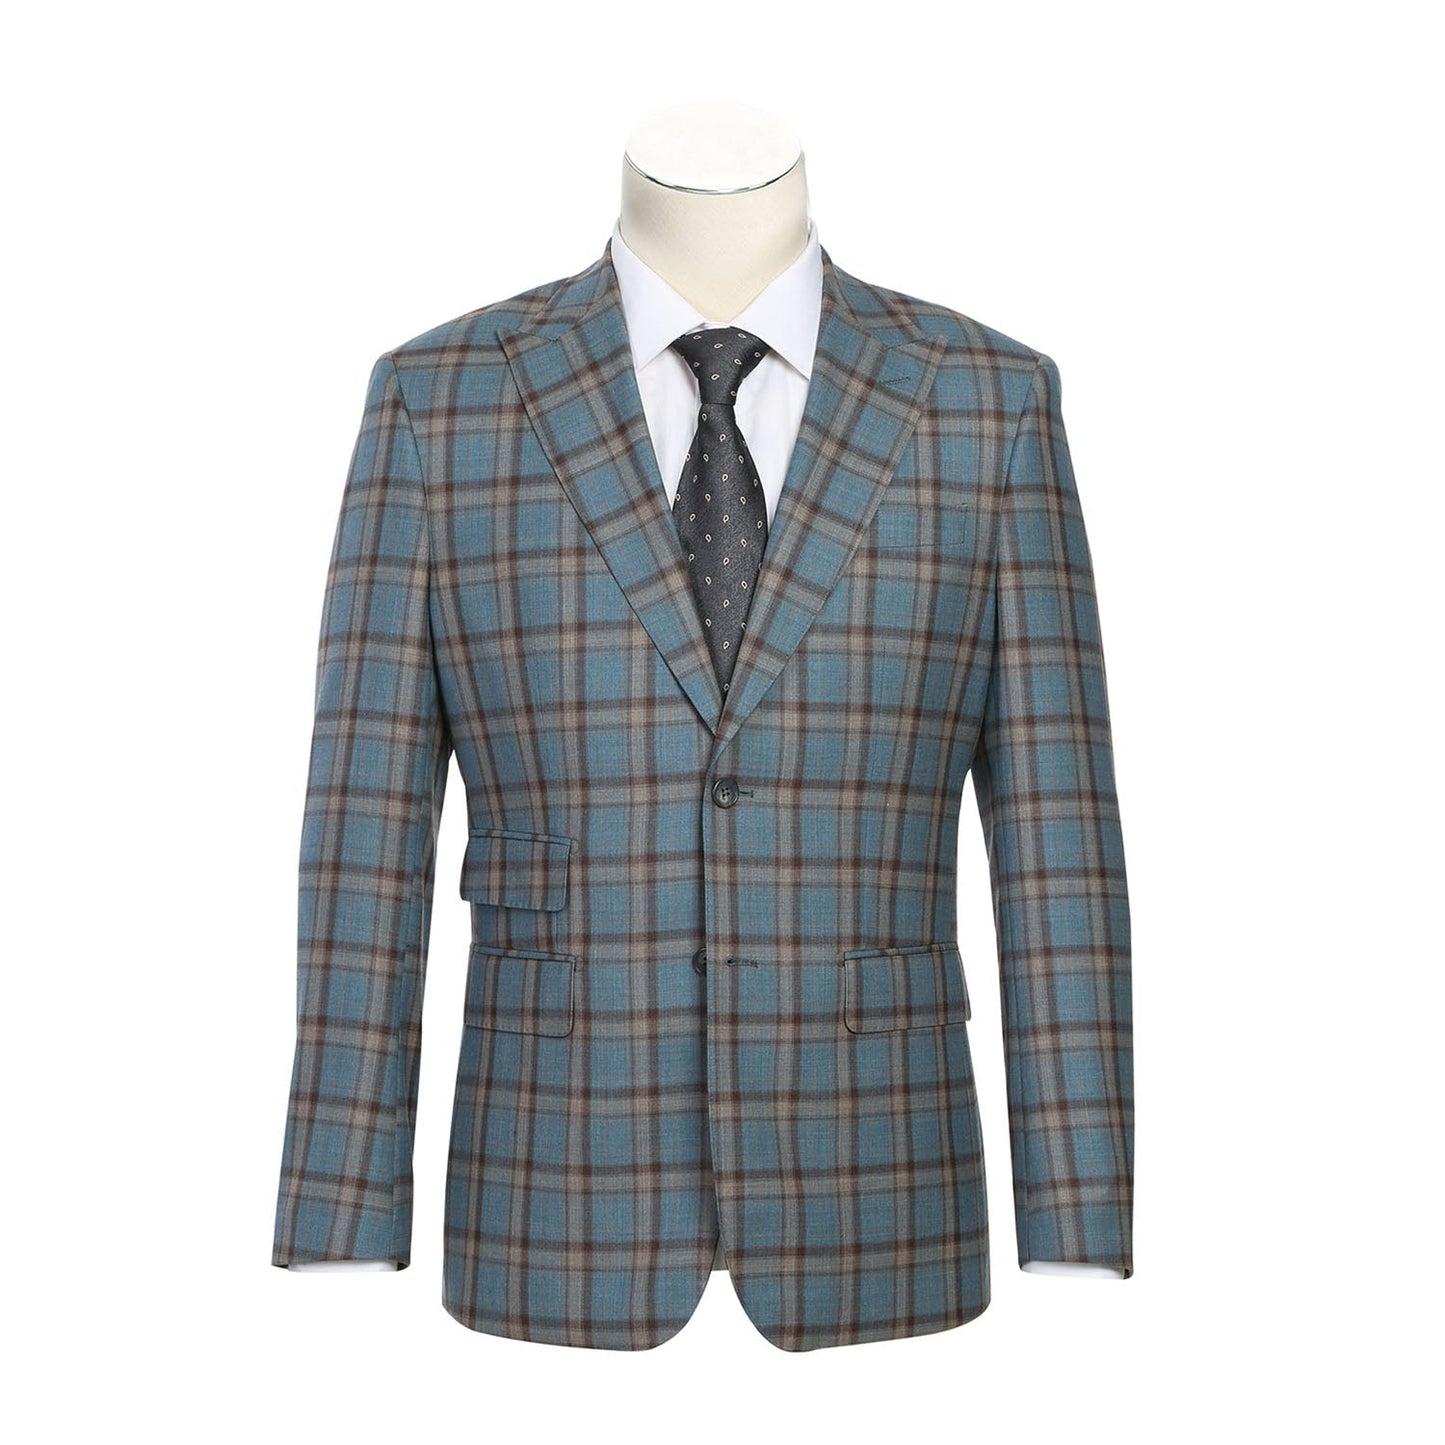 EL72-57-470 Slim Fit English Laundry Light Gray with Bronze Stereoscopic-Grid Wool Suit